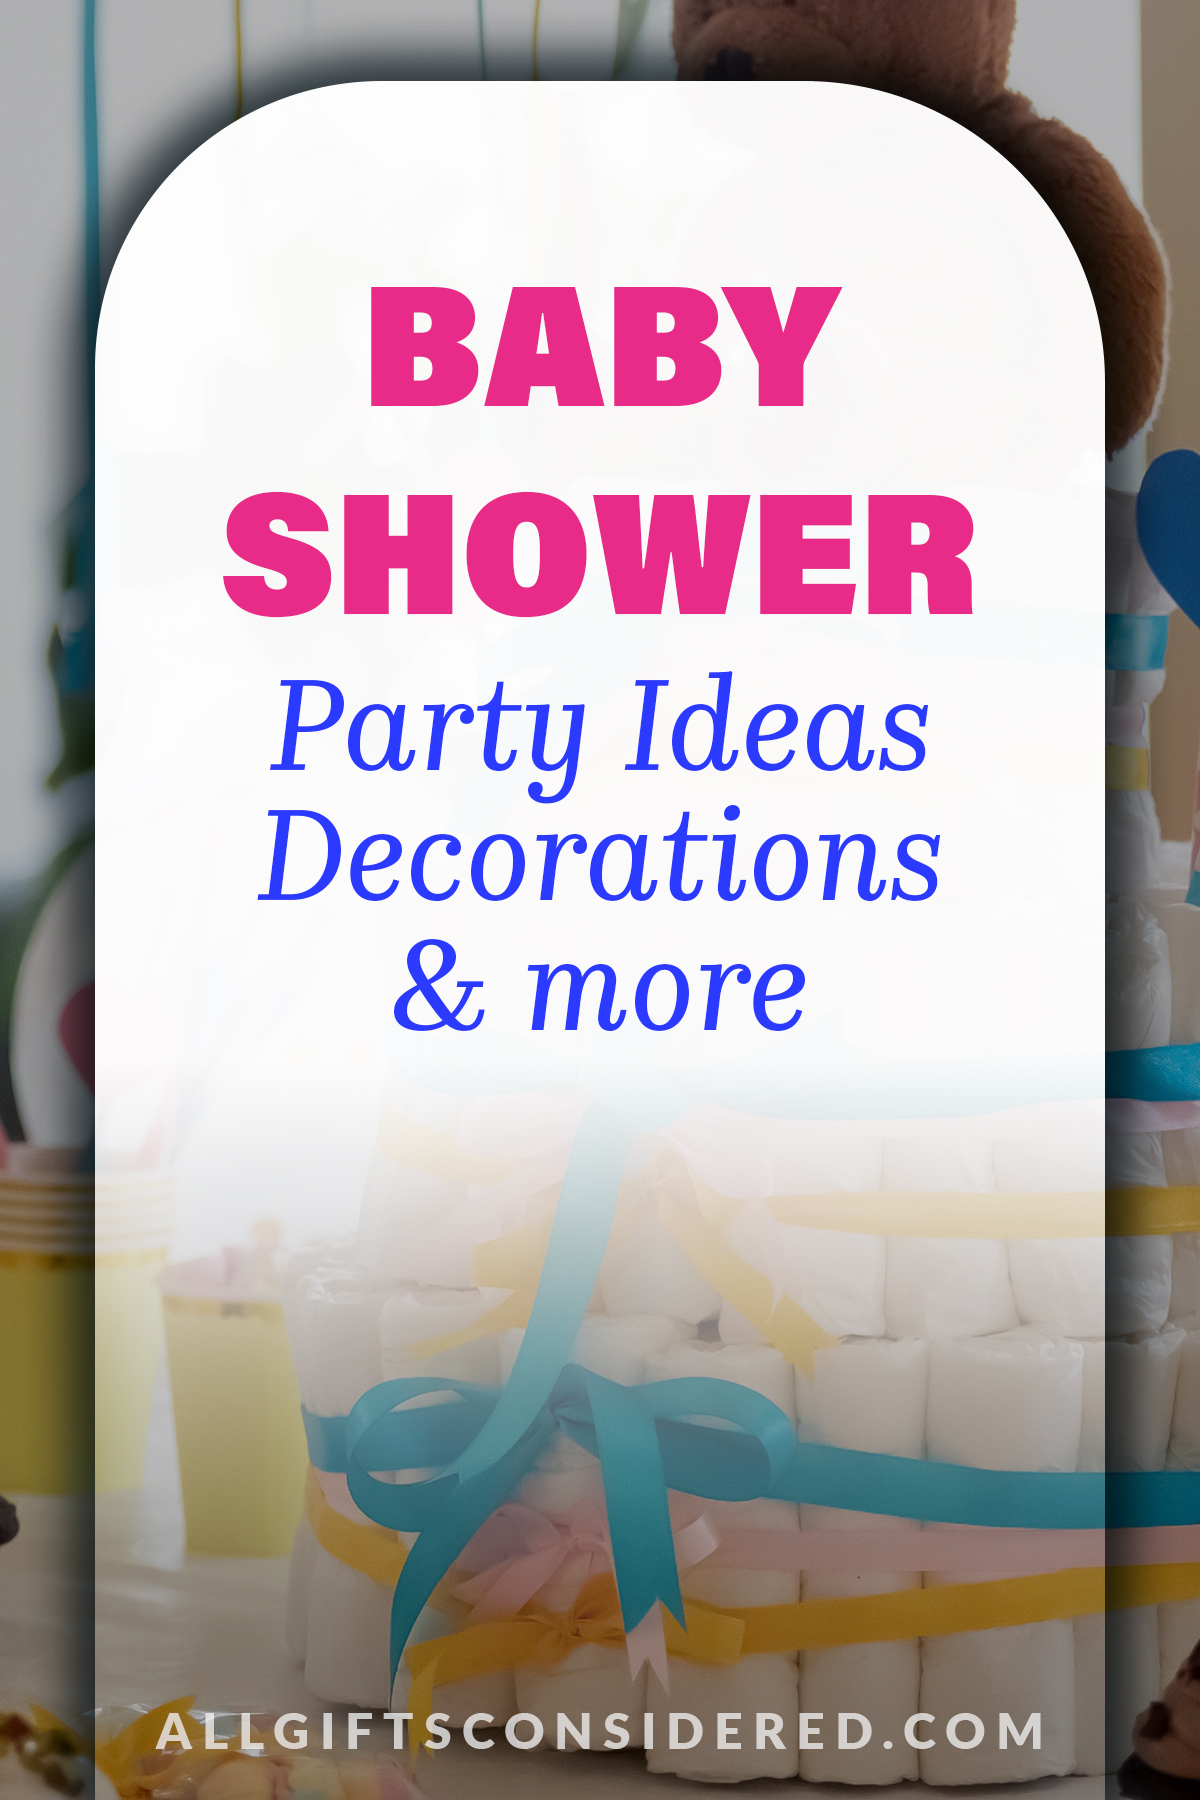 Baby shower ideas - feature image